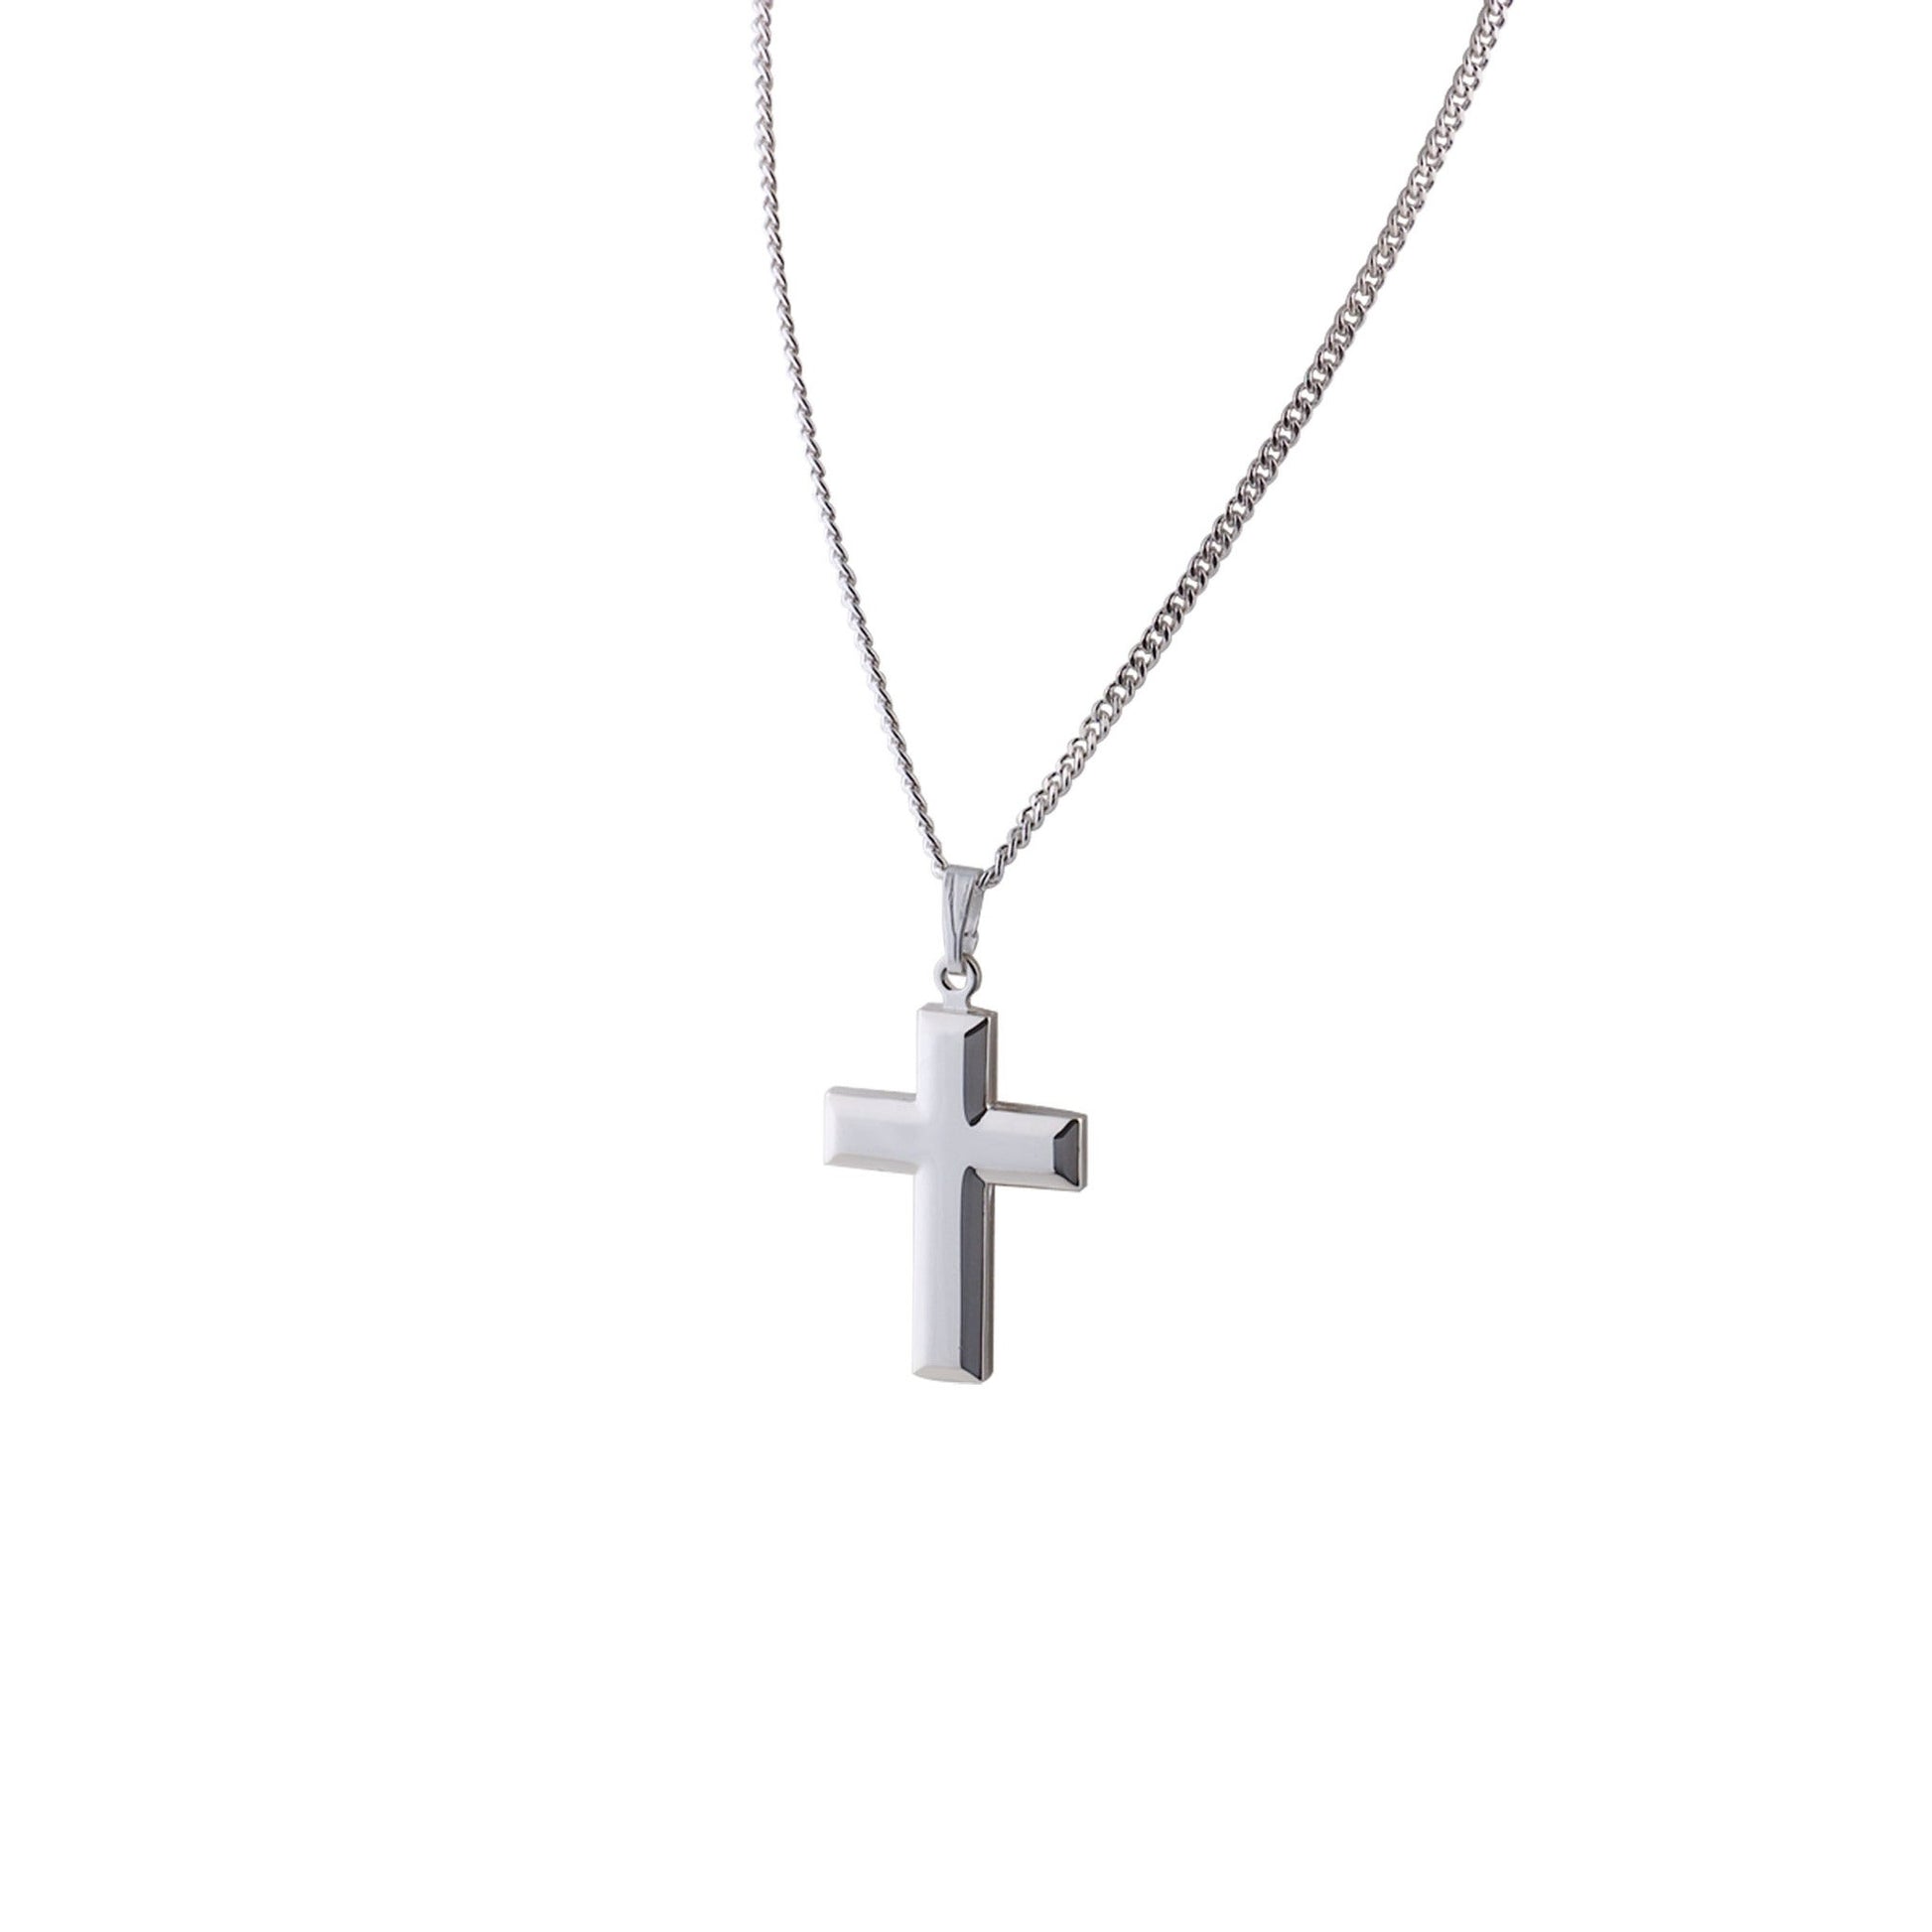 A thick beveled edge cross displayed on a neutral white background.